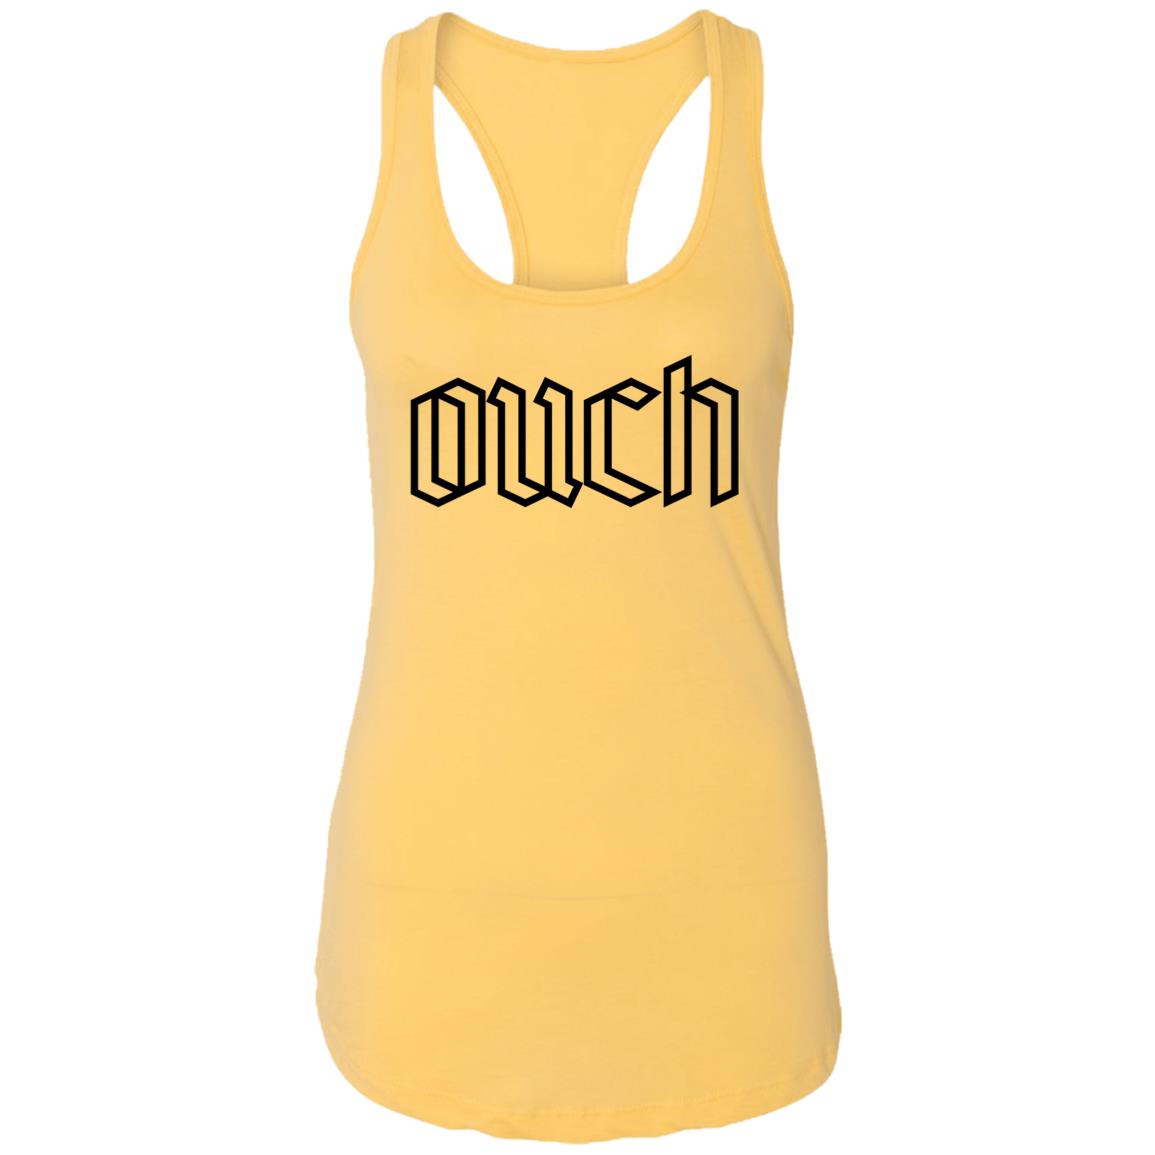 OUCH Racerback Tank